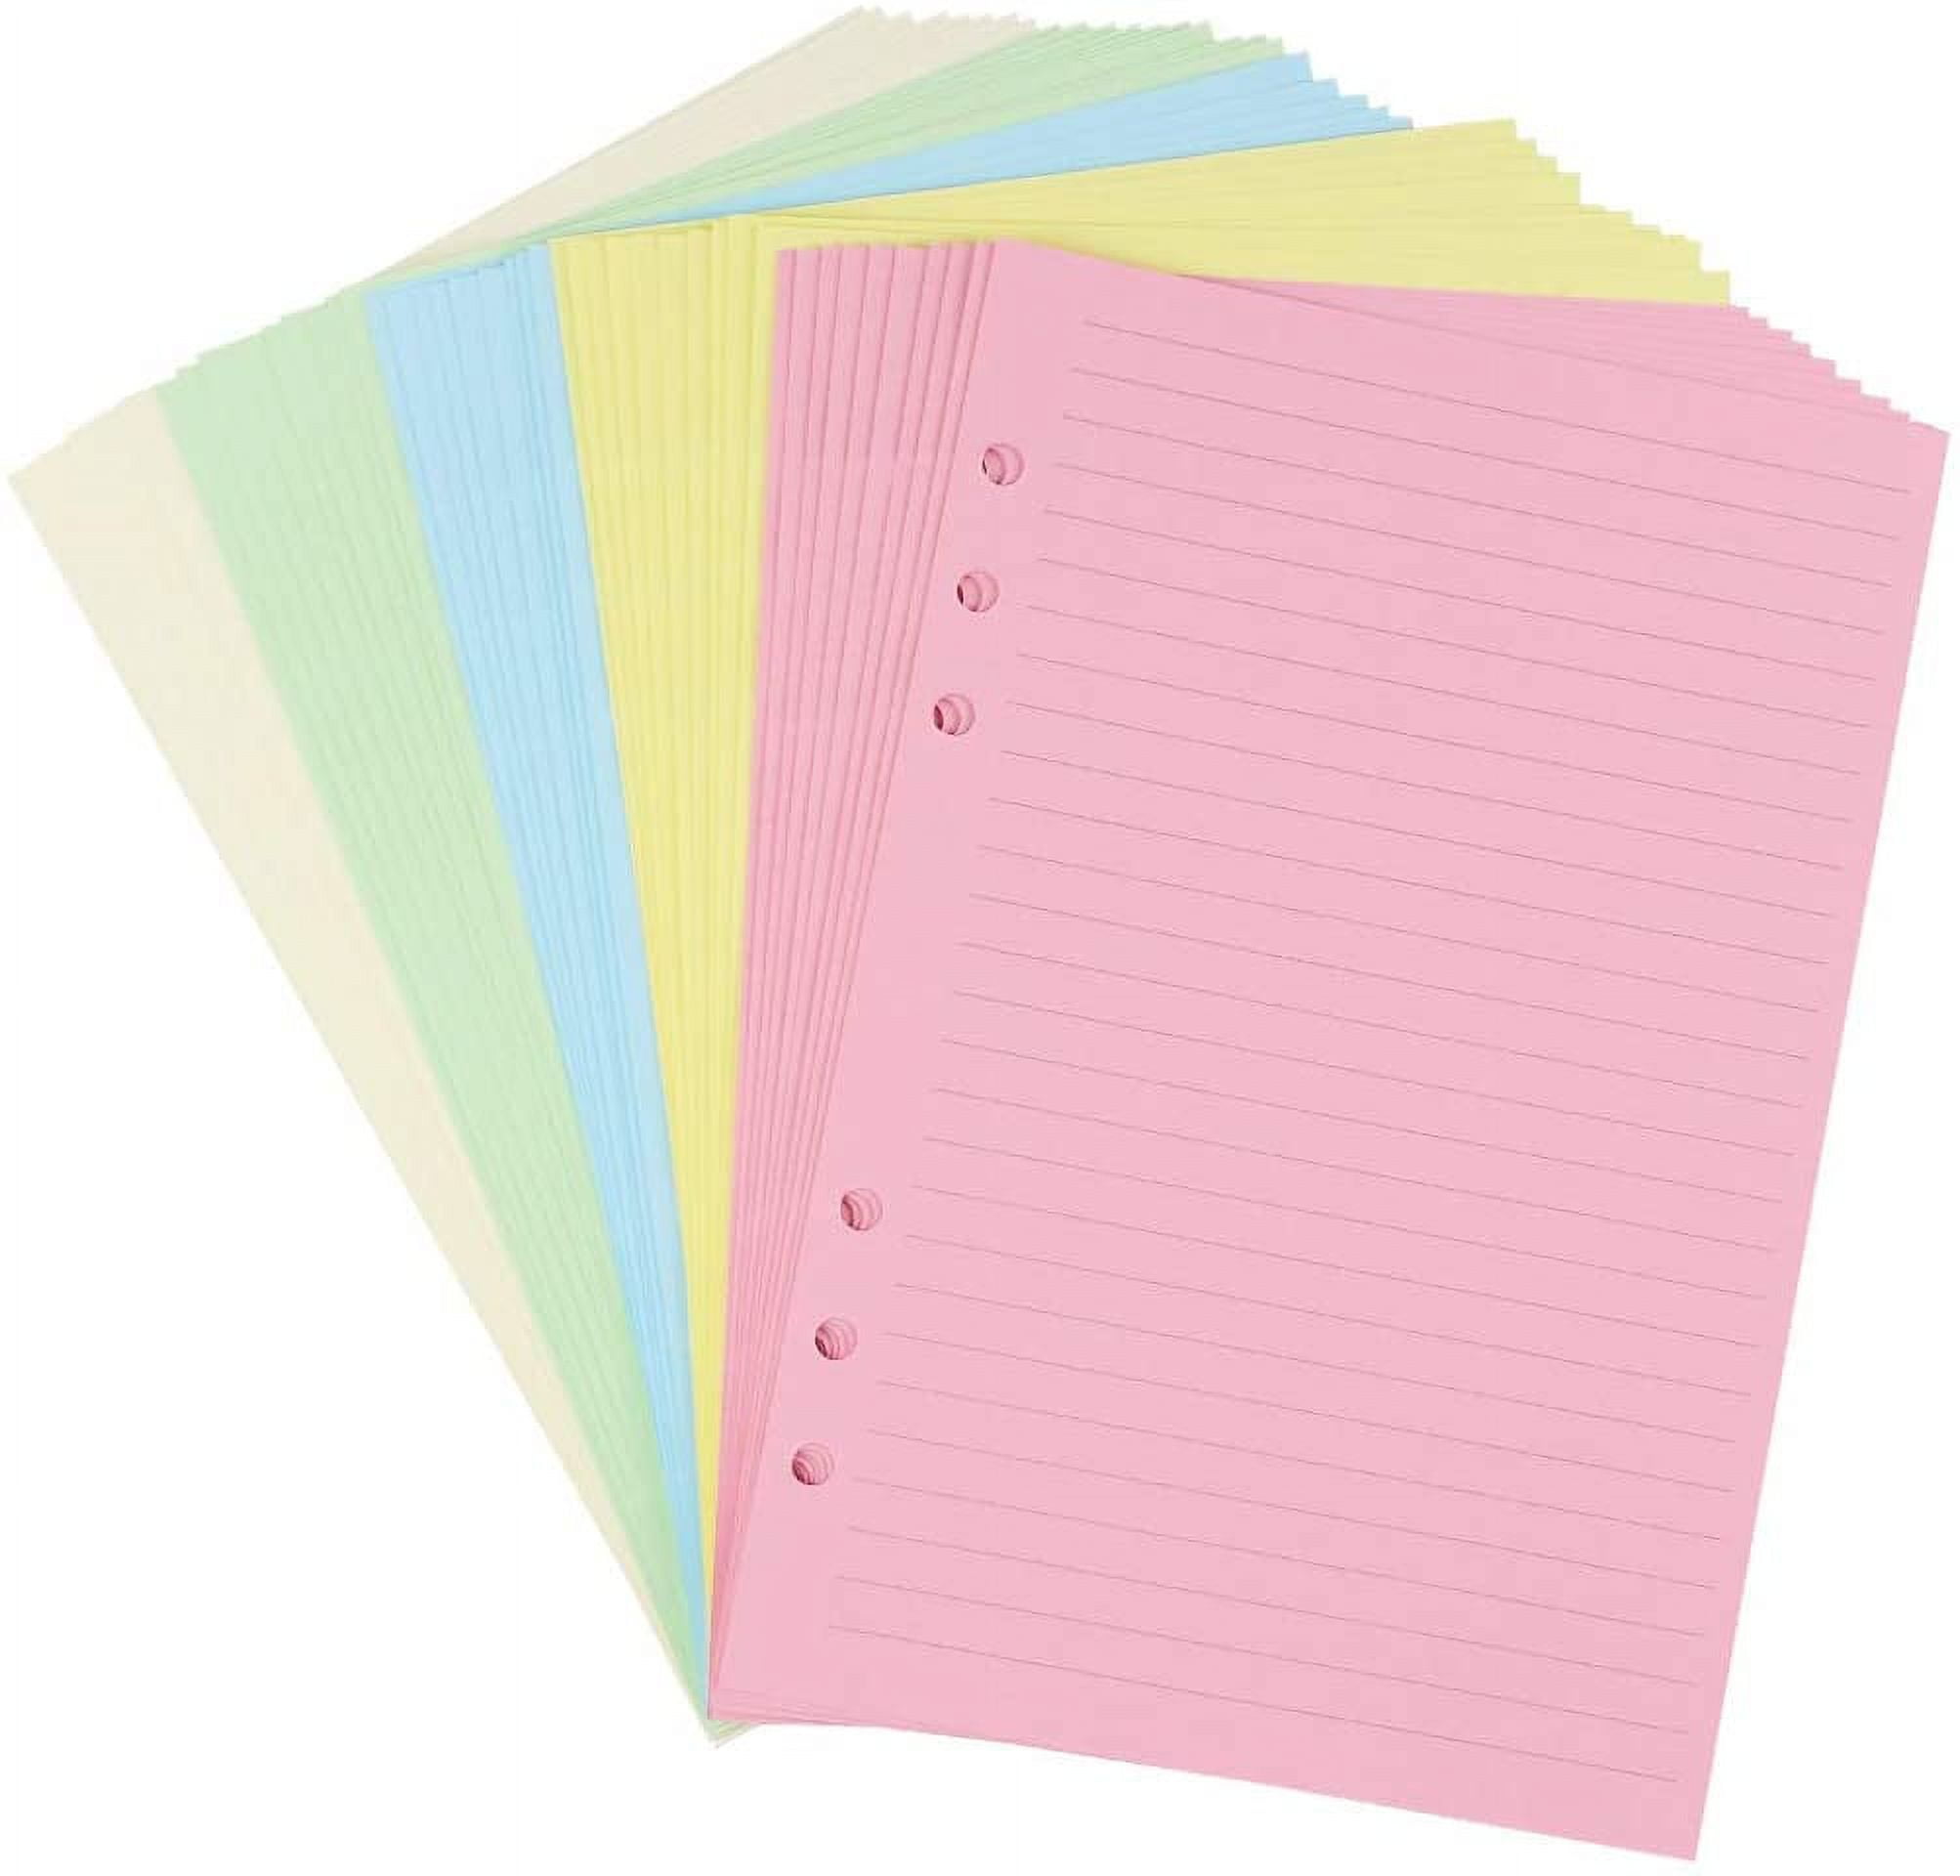  A5 Size Name & Address Refill, Sized and Punched for 6-Ring A5  Notebooks by Filofax, LV (GM), Kikki K, TMI, and others. Sheet Size 5.83 x  8.27 (148mm x 210mm).